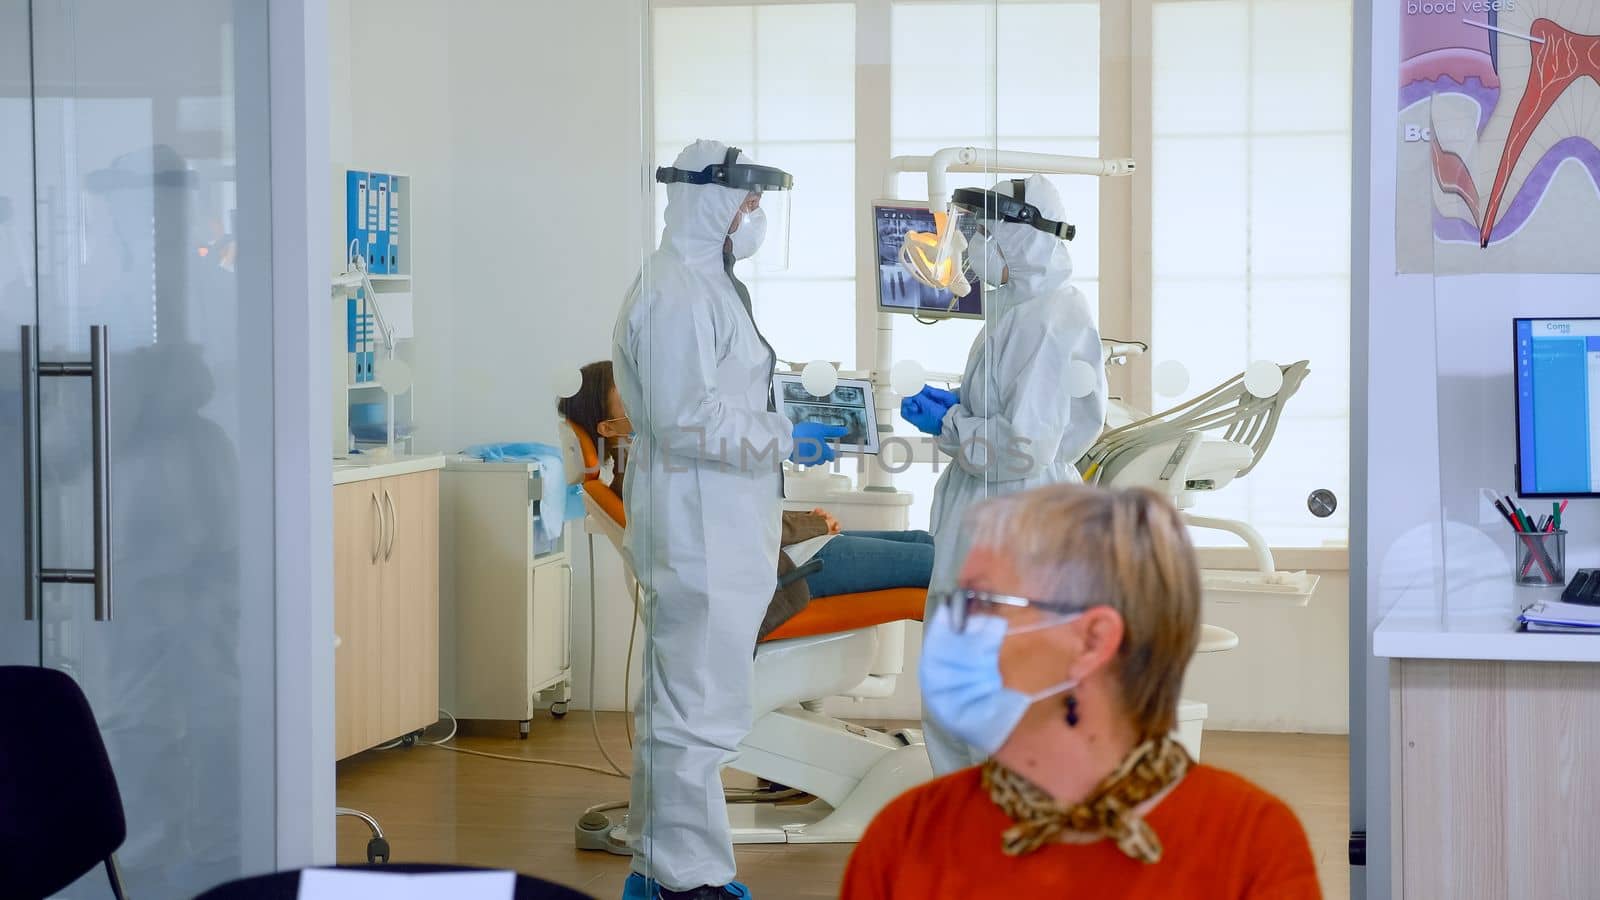 Doctors wearing full virus protection uniform standing in surgery room planning dental treatment while elderly patients waiting in reception keeping distance. Concept of new normal dentist visit